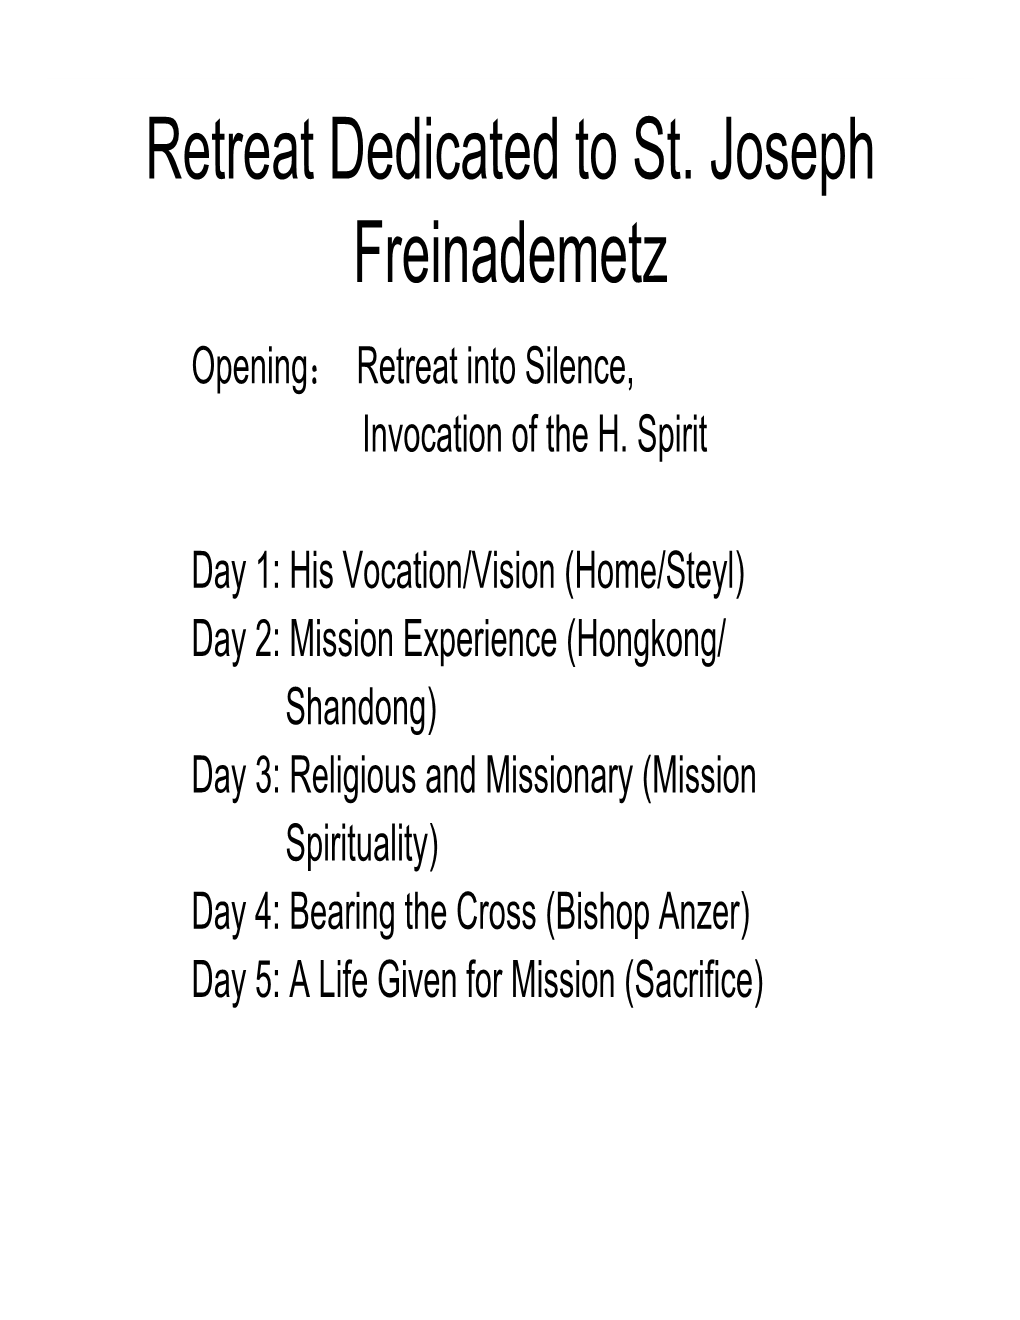 Retreat Dedicated to St. Joseph Freinademetz Opening： Retreat Into Silence, Invocation of the H